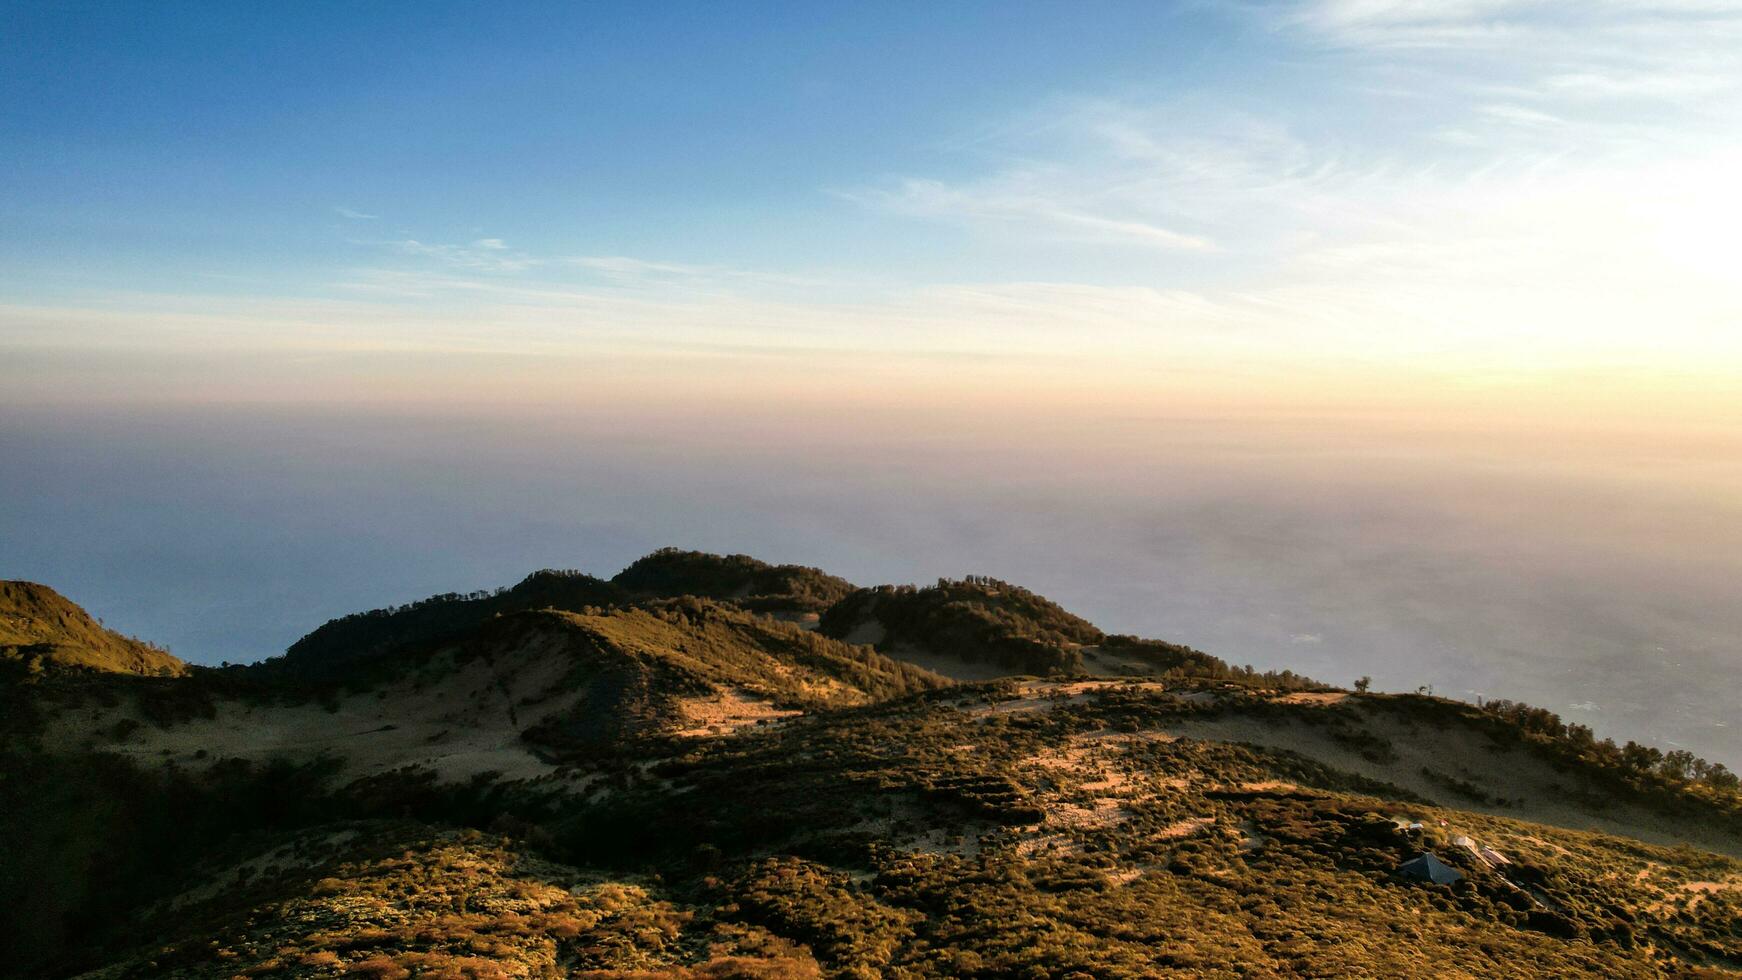 The beautiful Landscape view from Lawu Mountain at sunrise located in Magetan. One of the most beautiful mountains in Java with an altitude of 3265m above sea level. Magetan, Indonesia August 1, 2023 photo